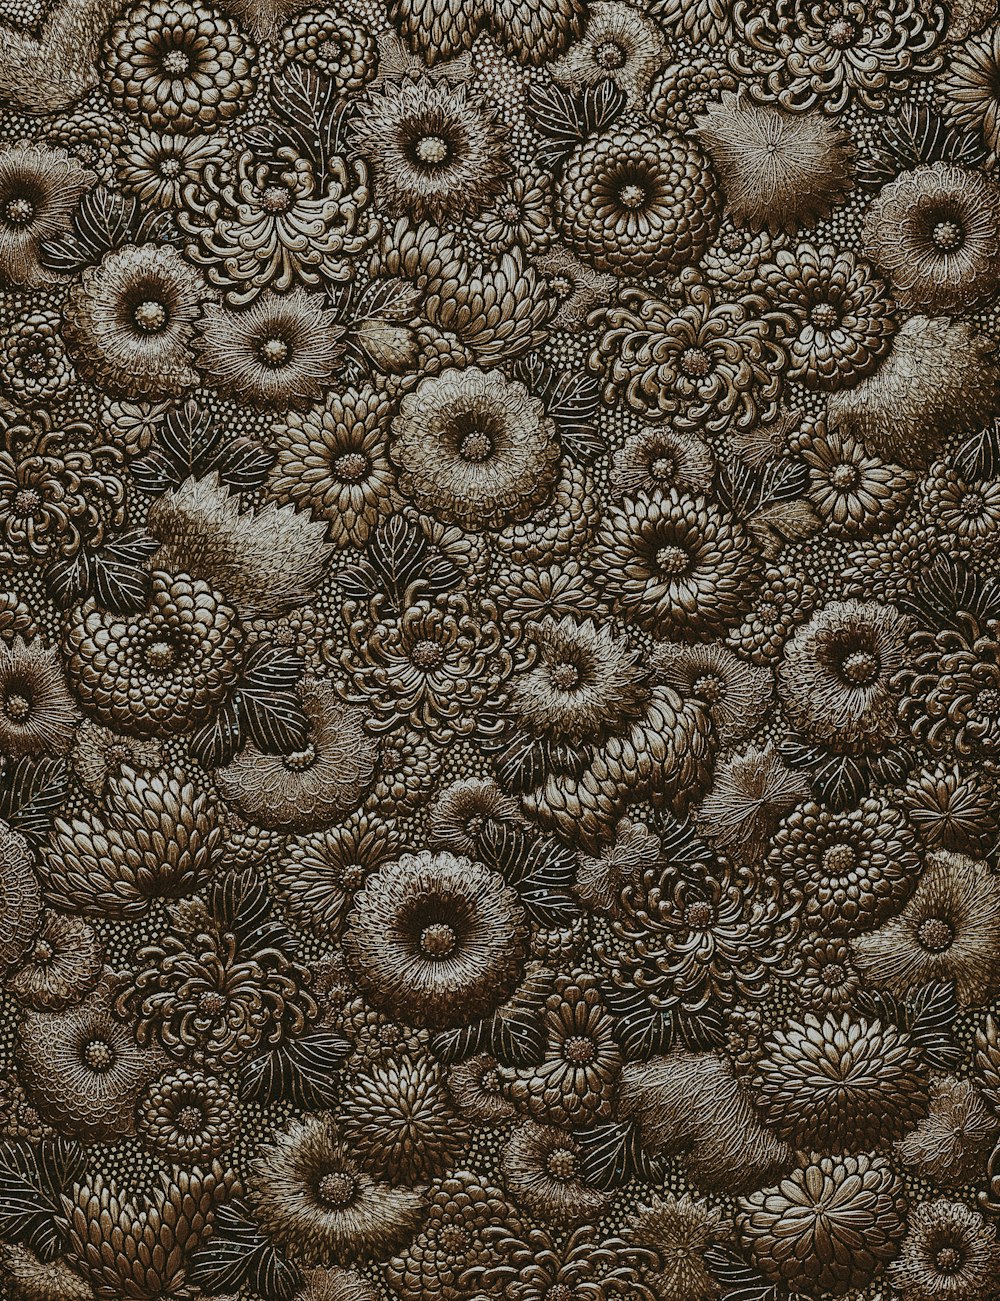 a close up of a pattern of flowers